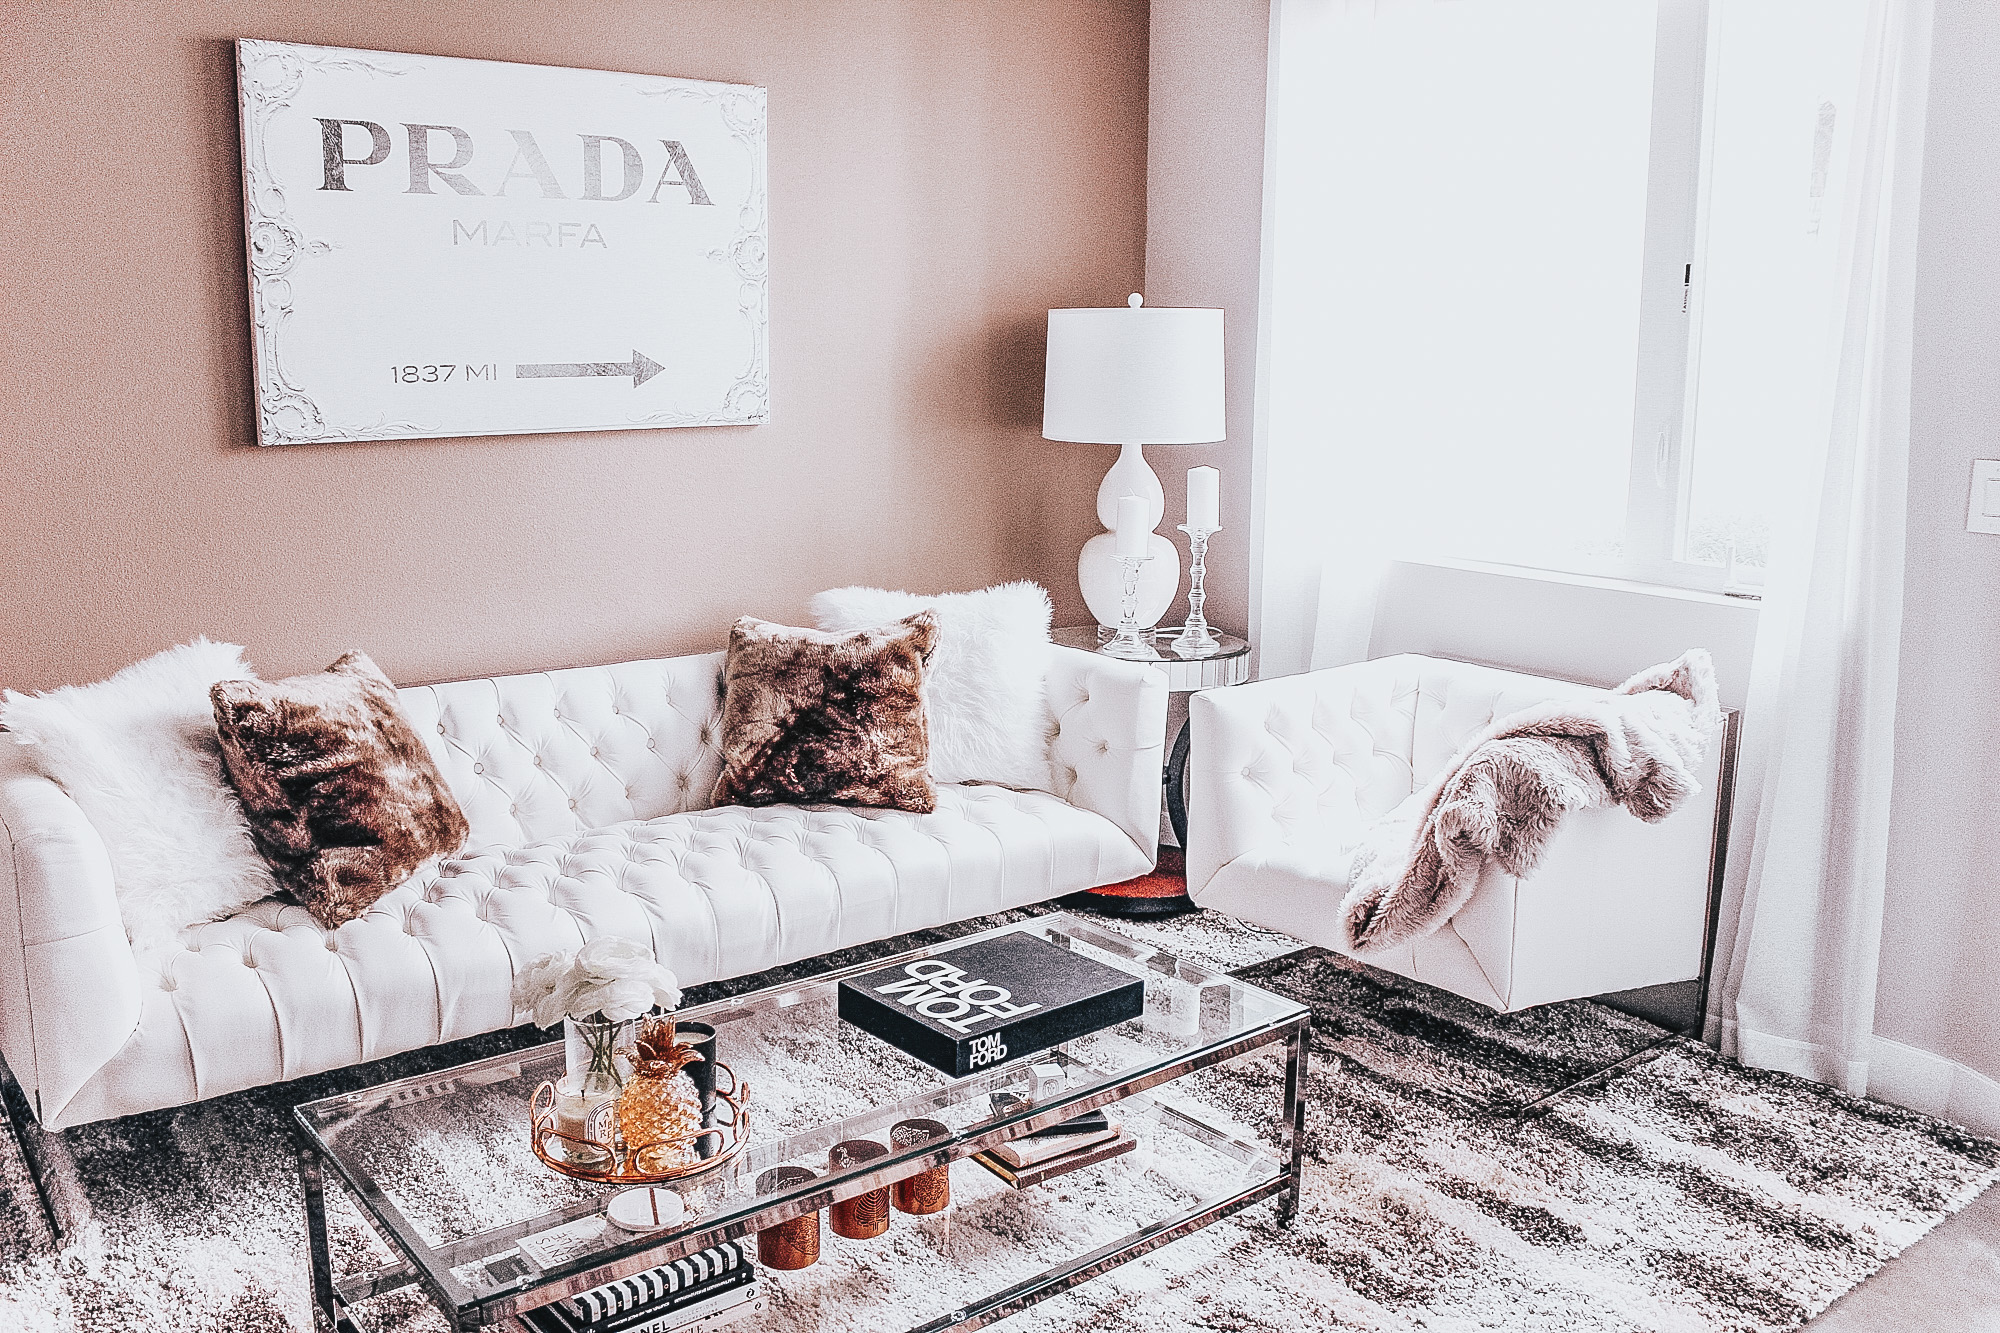 Blondie in the City Home Decor | White & Neutral Living Room | Hayley Larue Blog | Living Spaces | Z Gallerie | Prada Marfa Canvas